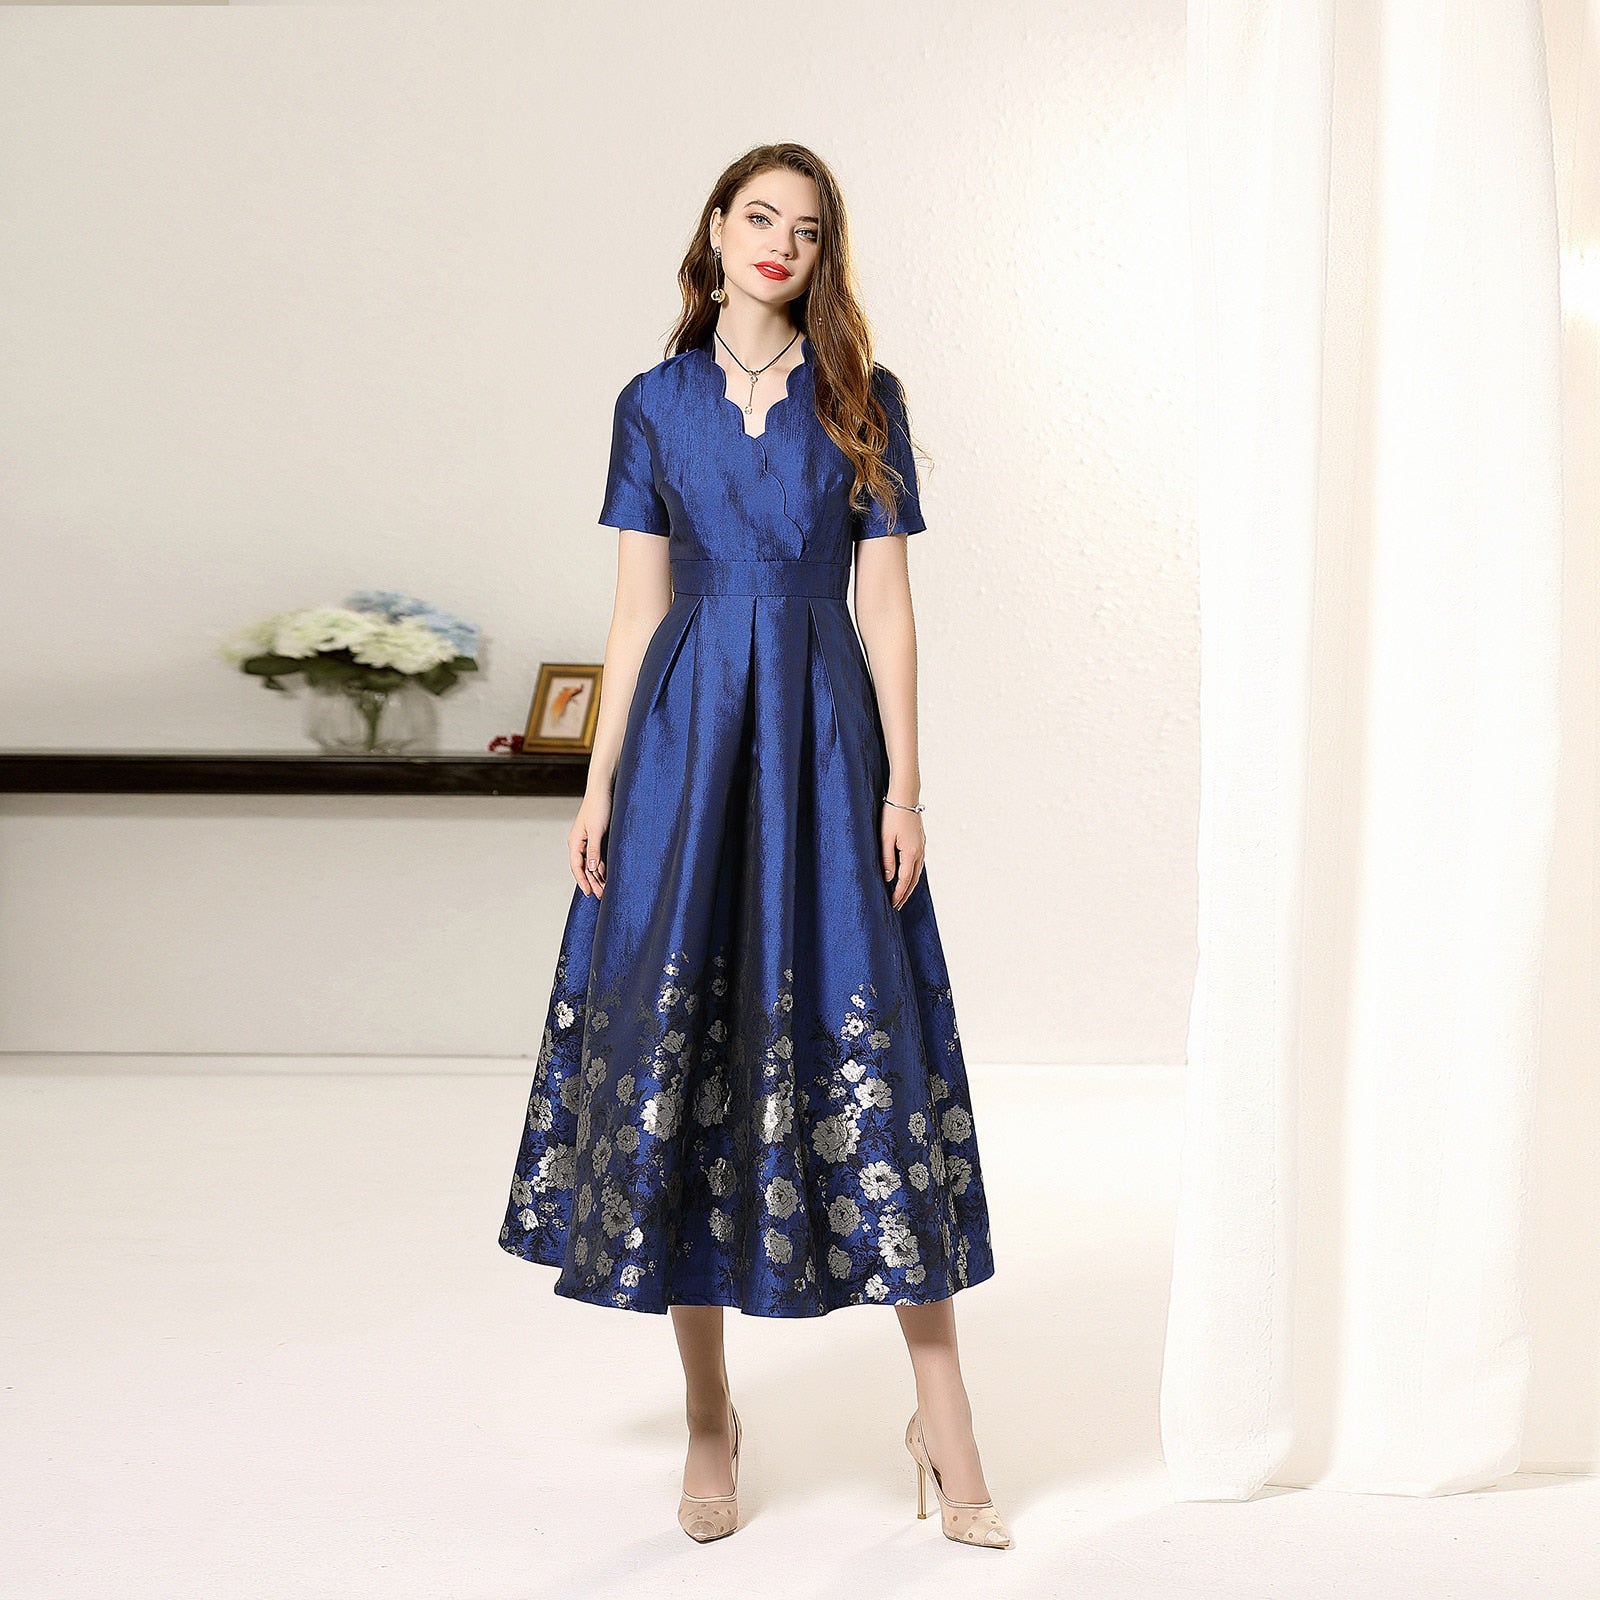 Hand-Made Navy Blue Brocade Floral Mother of the Bride Dress